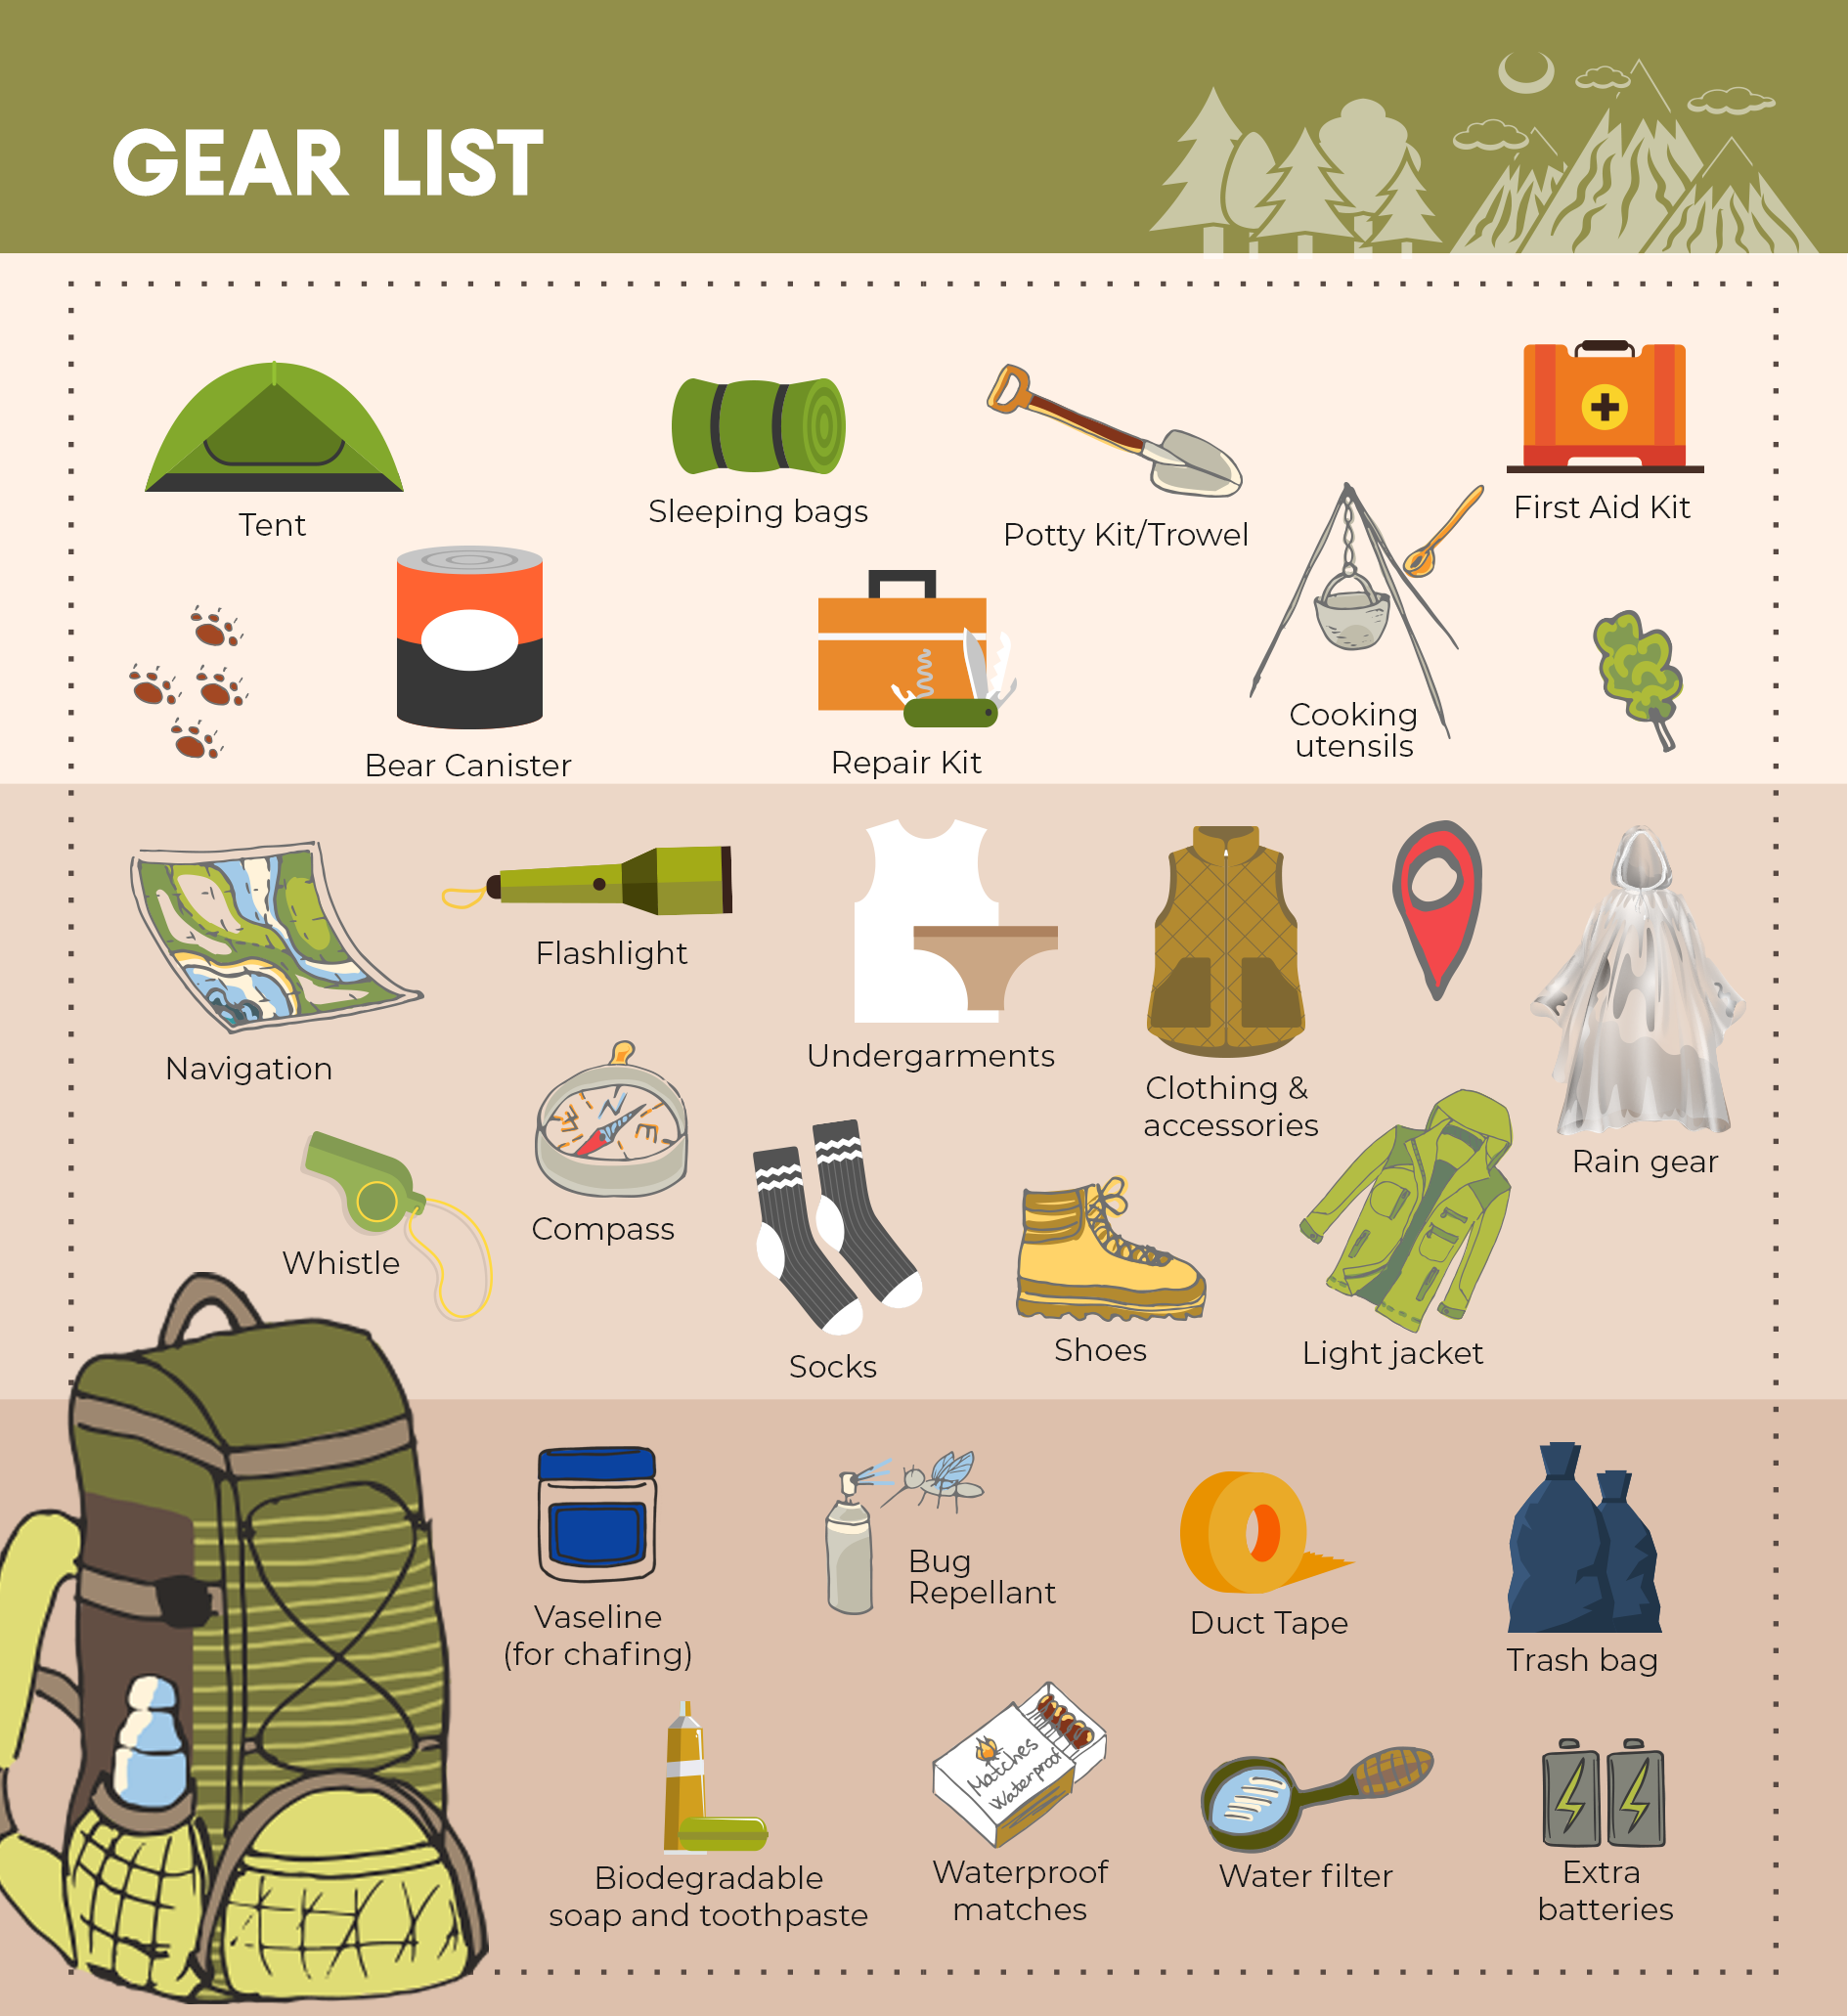 Hiking the Appalachian Trail - The Complete Guide for Beginners in 2020 ...